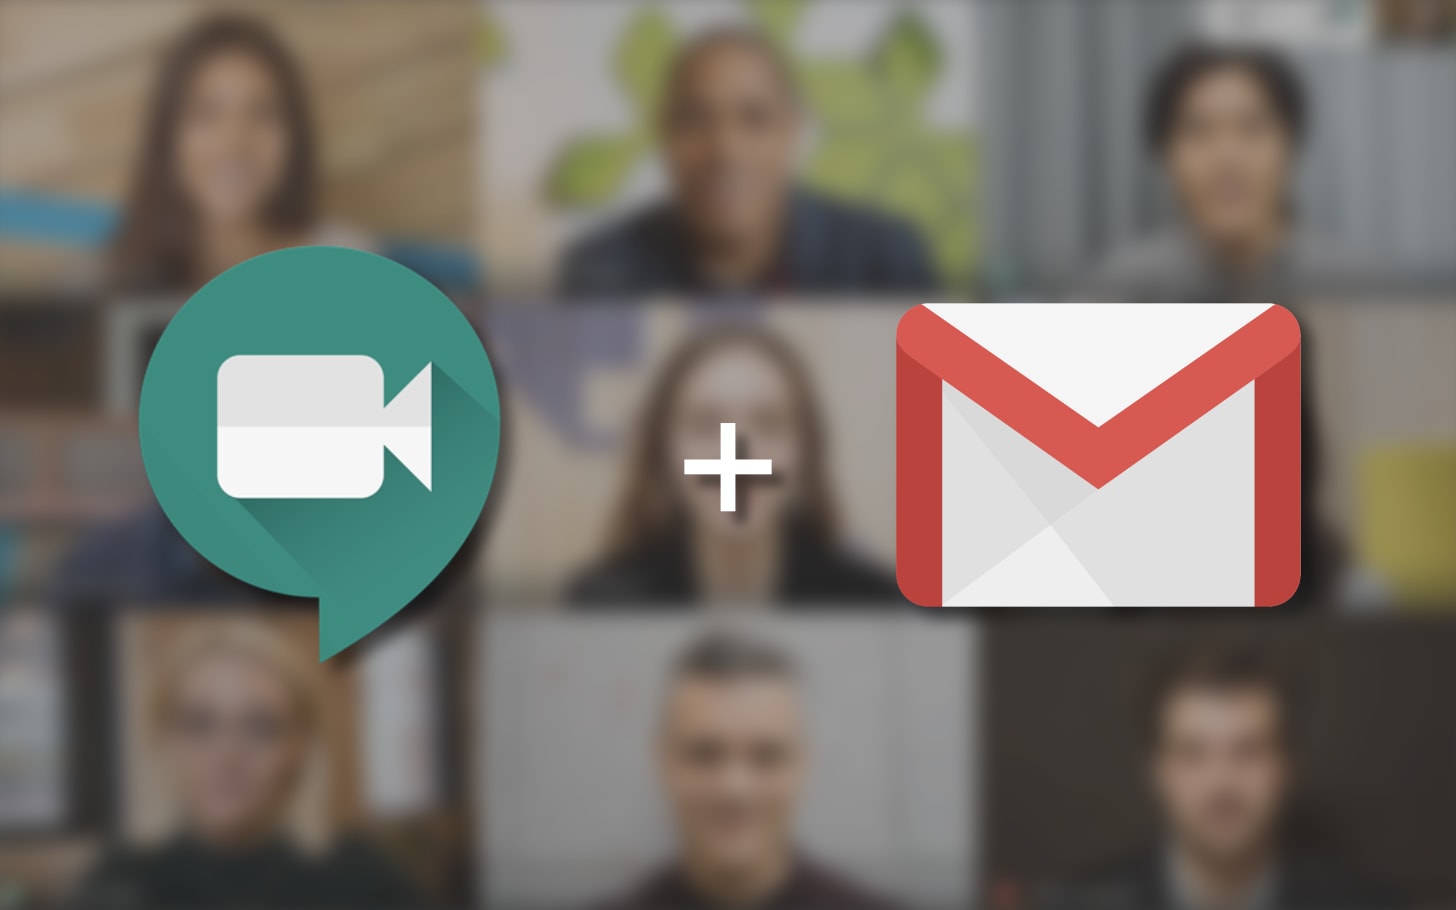 Google Meet starts releasing on Gmail for Android users